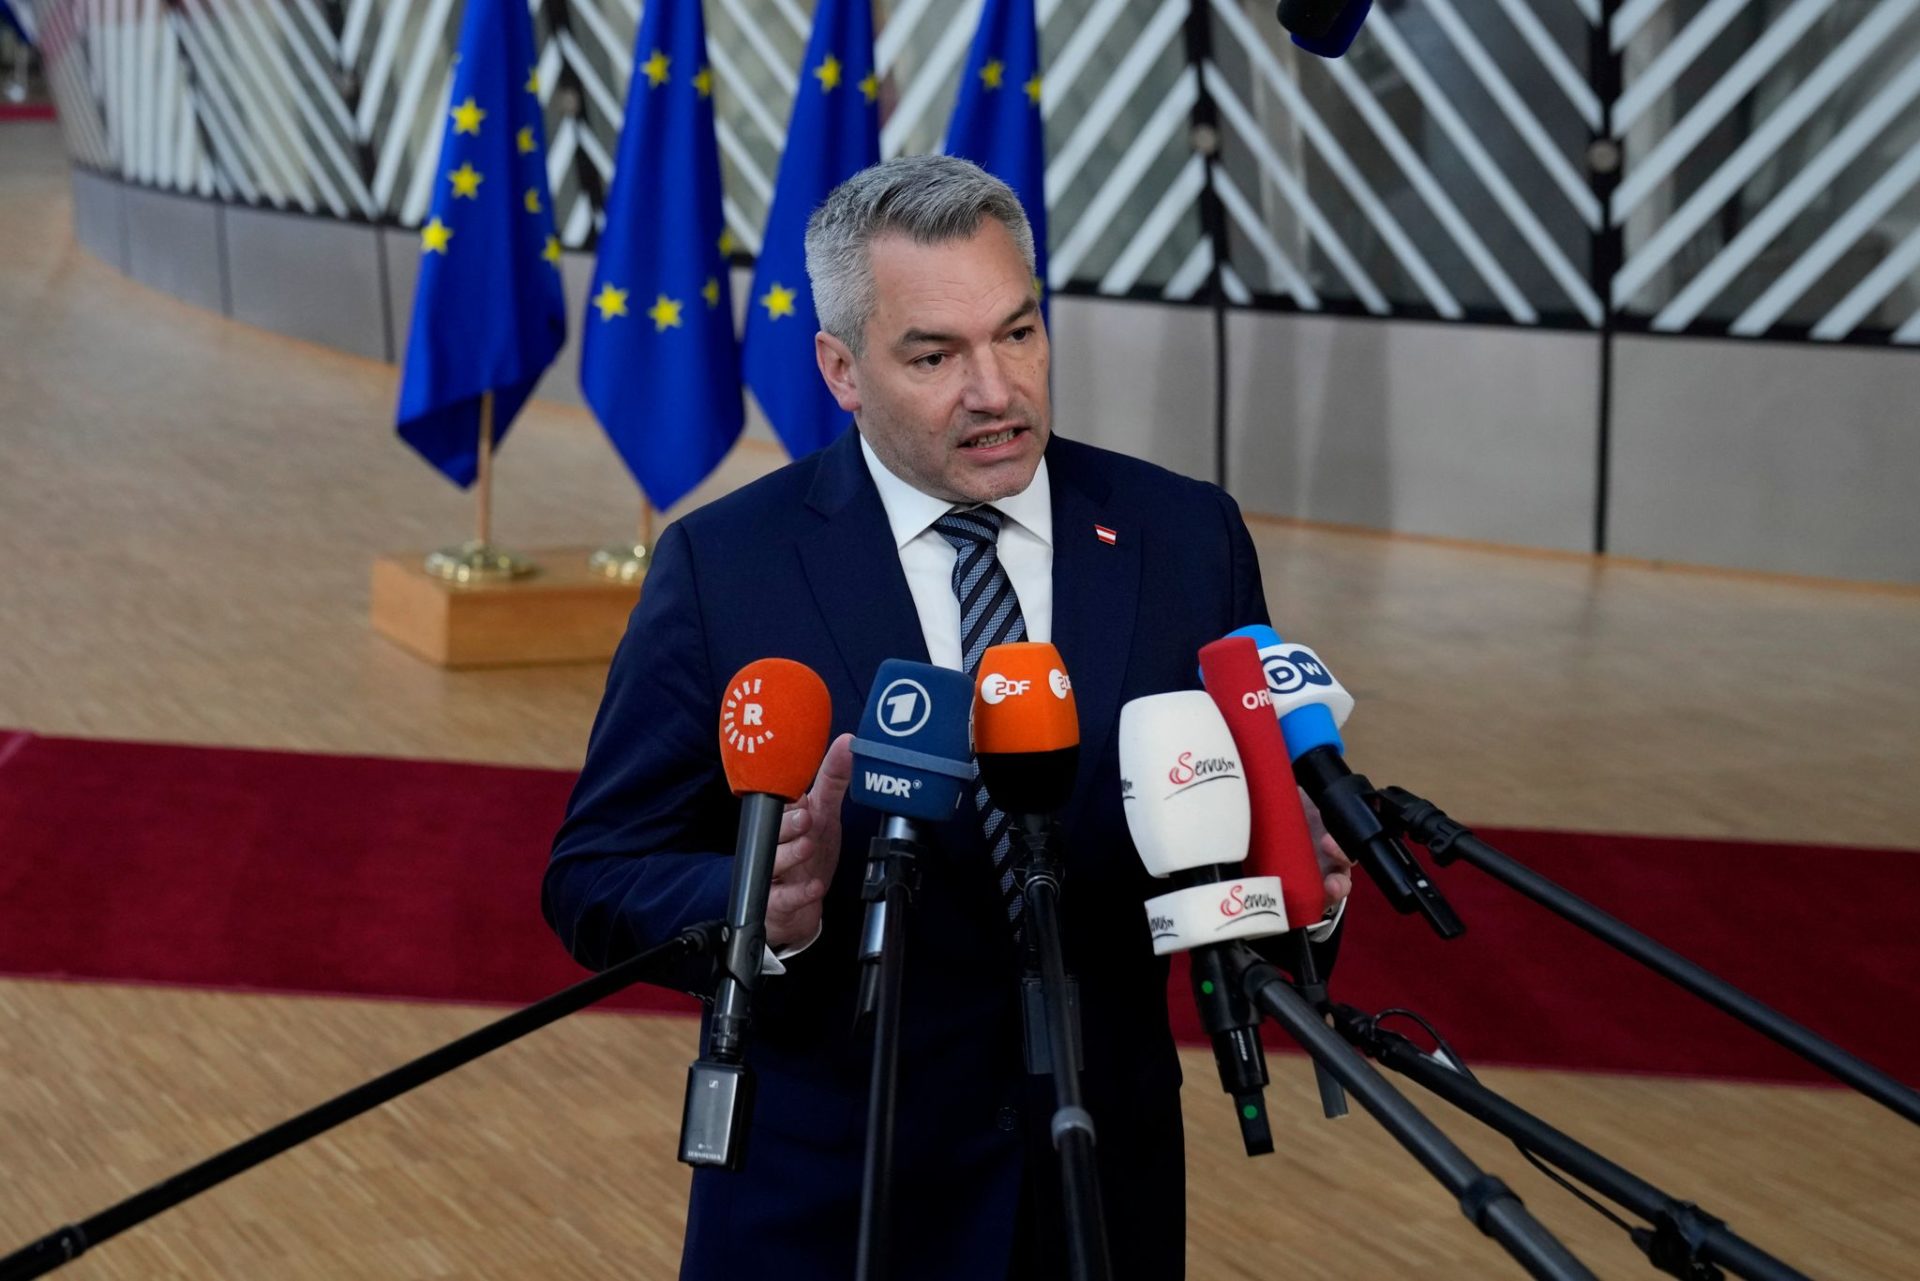 Europe in brief: Austria calls for barriers at EU external borders, corruption allegations in the EU parliament, EU agrees on lifting visa requirements for Kosovo’s citizens and the 27 Member States can’t agree on a price cap on imported gas